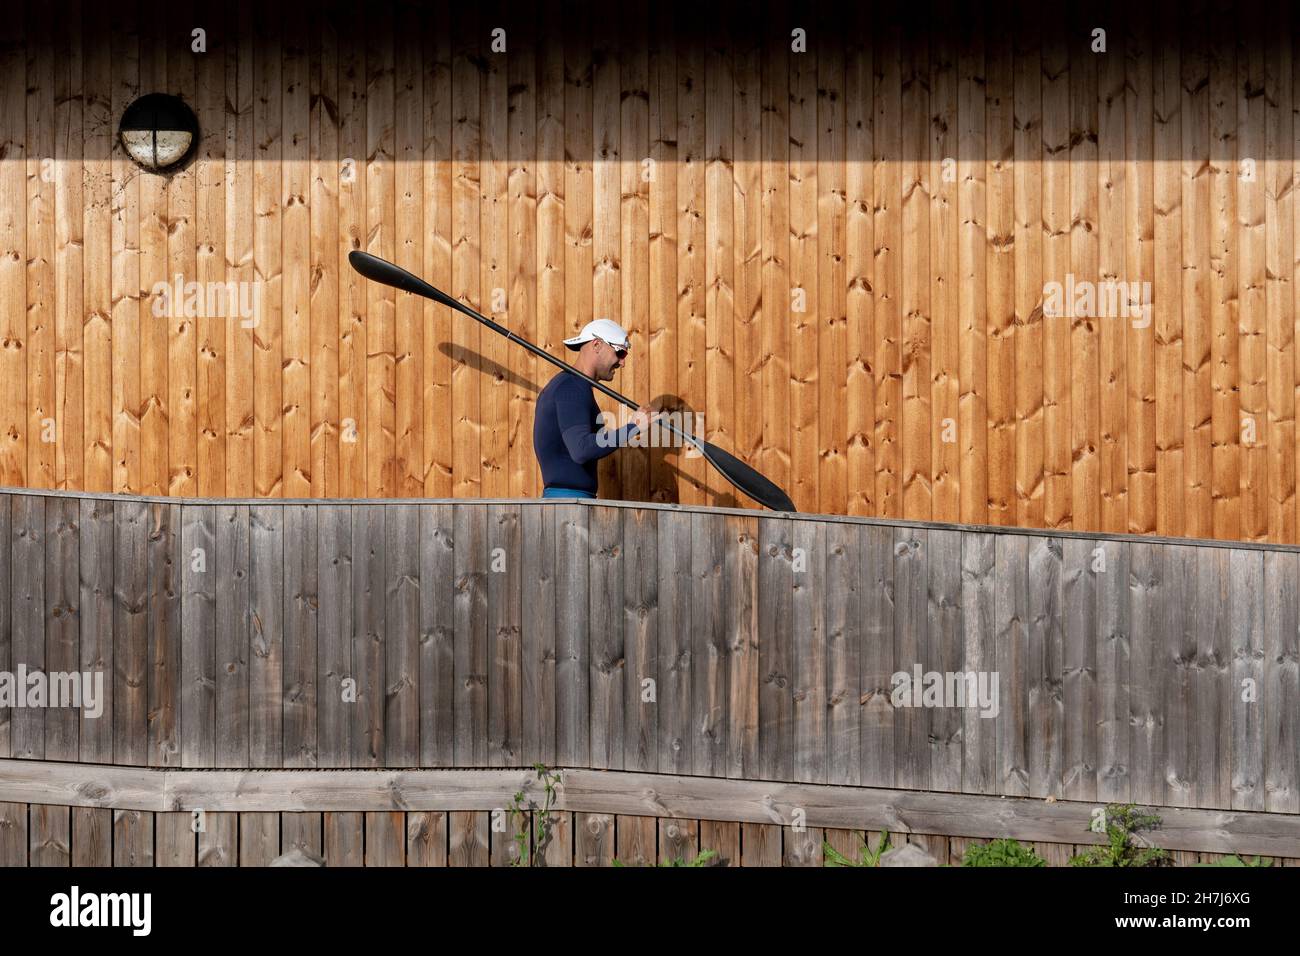 British sprint canoeist and multiple Olympic medalist Liam Heath, MBE, at his training facility on the 26th August 2020 at Dorney Lake in the United K Stock Photo